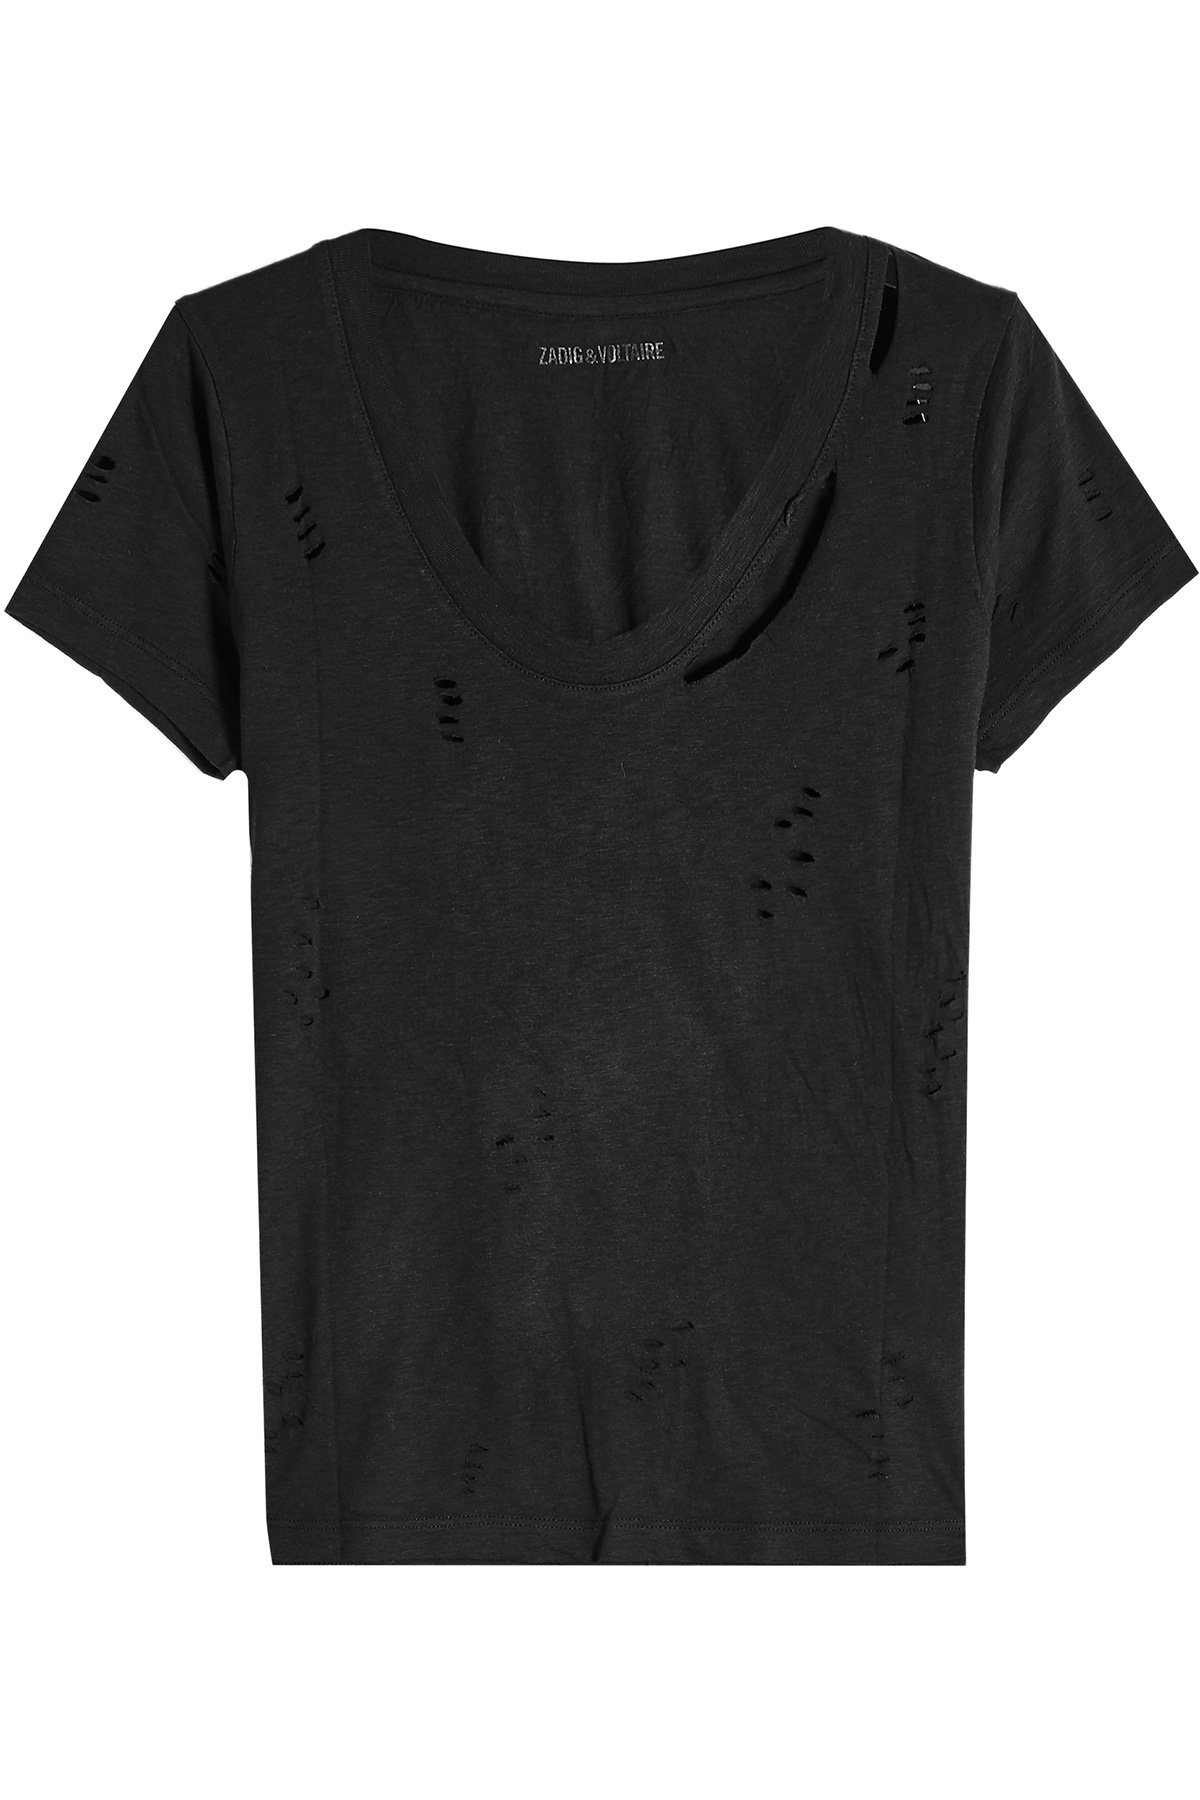 Zadig & Voltaire - Cara Distressed T-Shirt